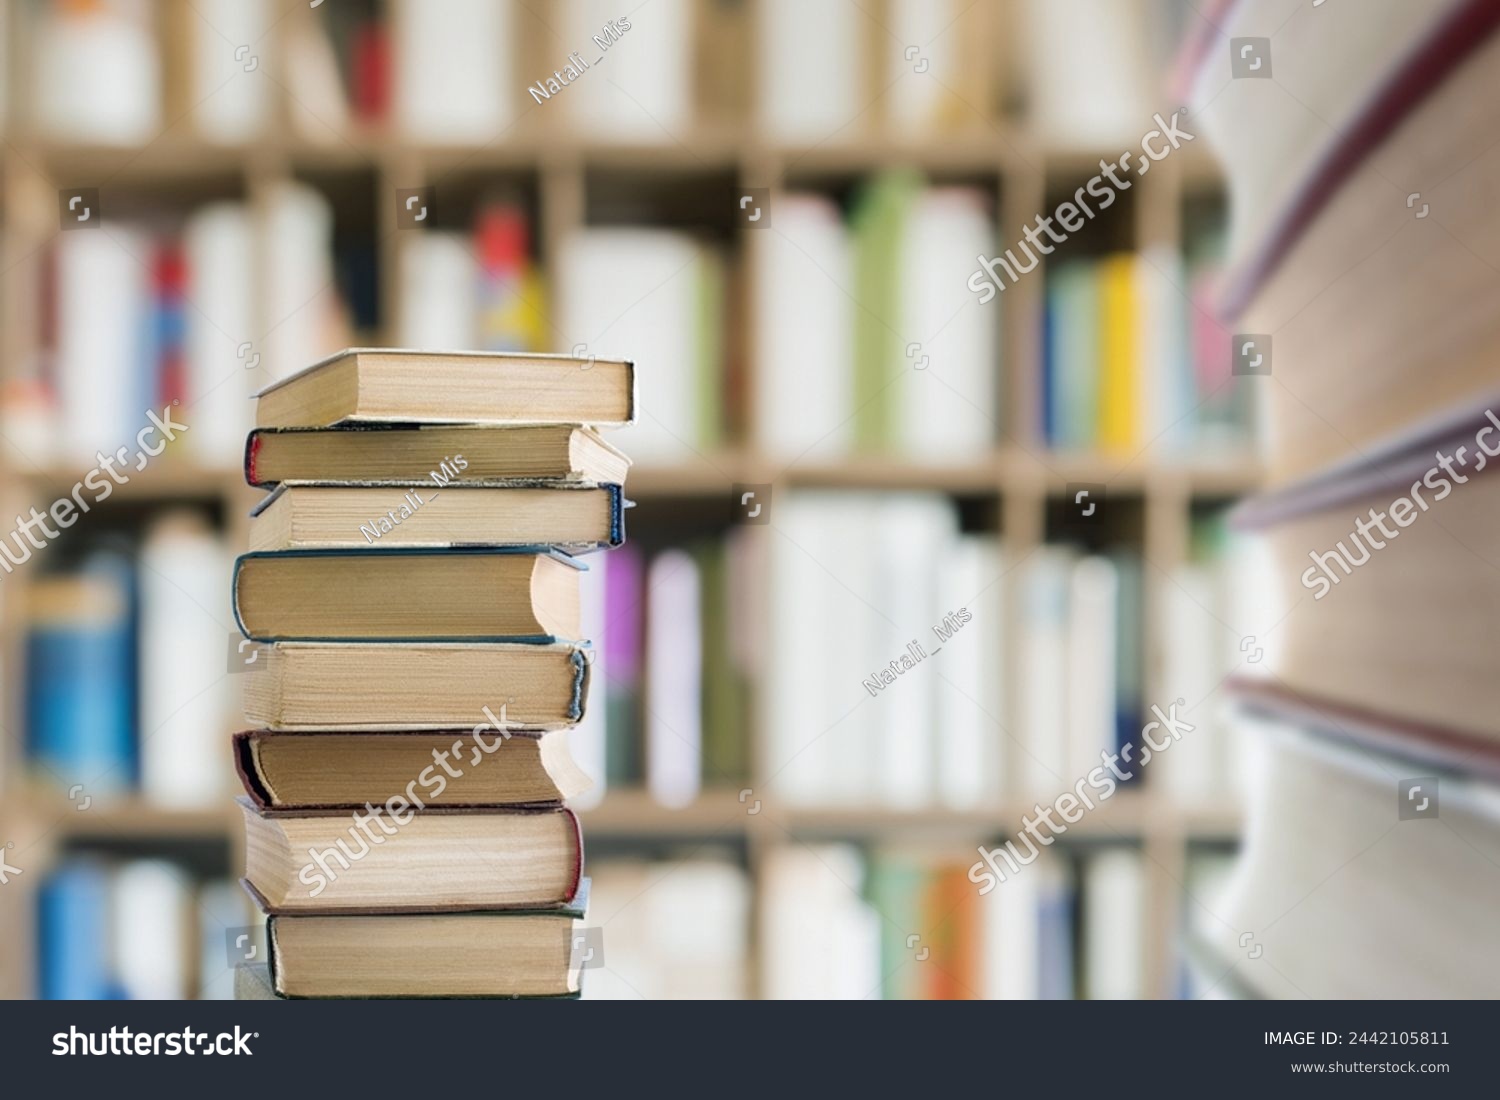 A stack of textbooks against a background of bookshelves in a library. #2442105811